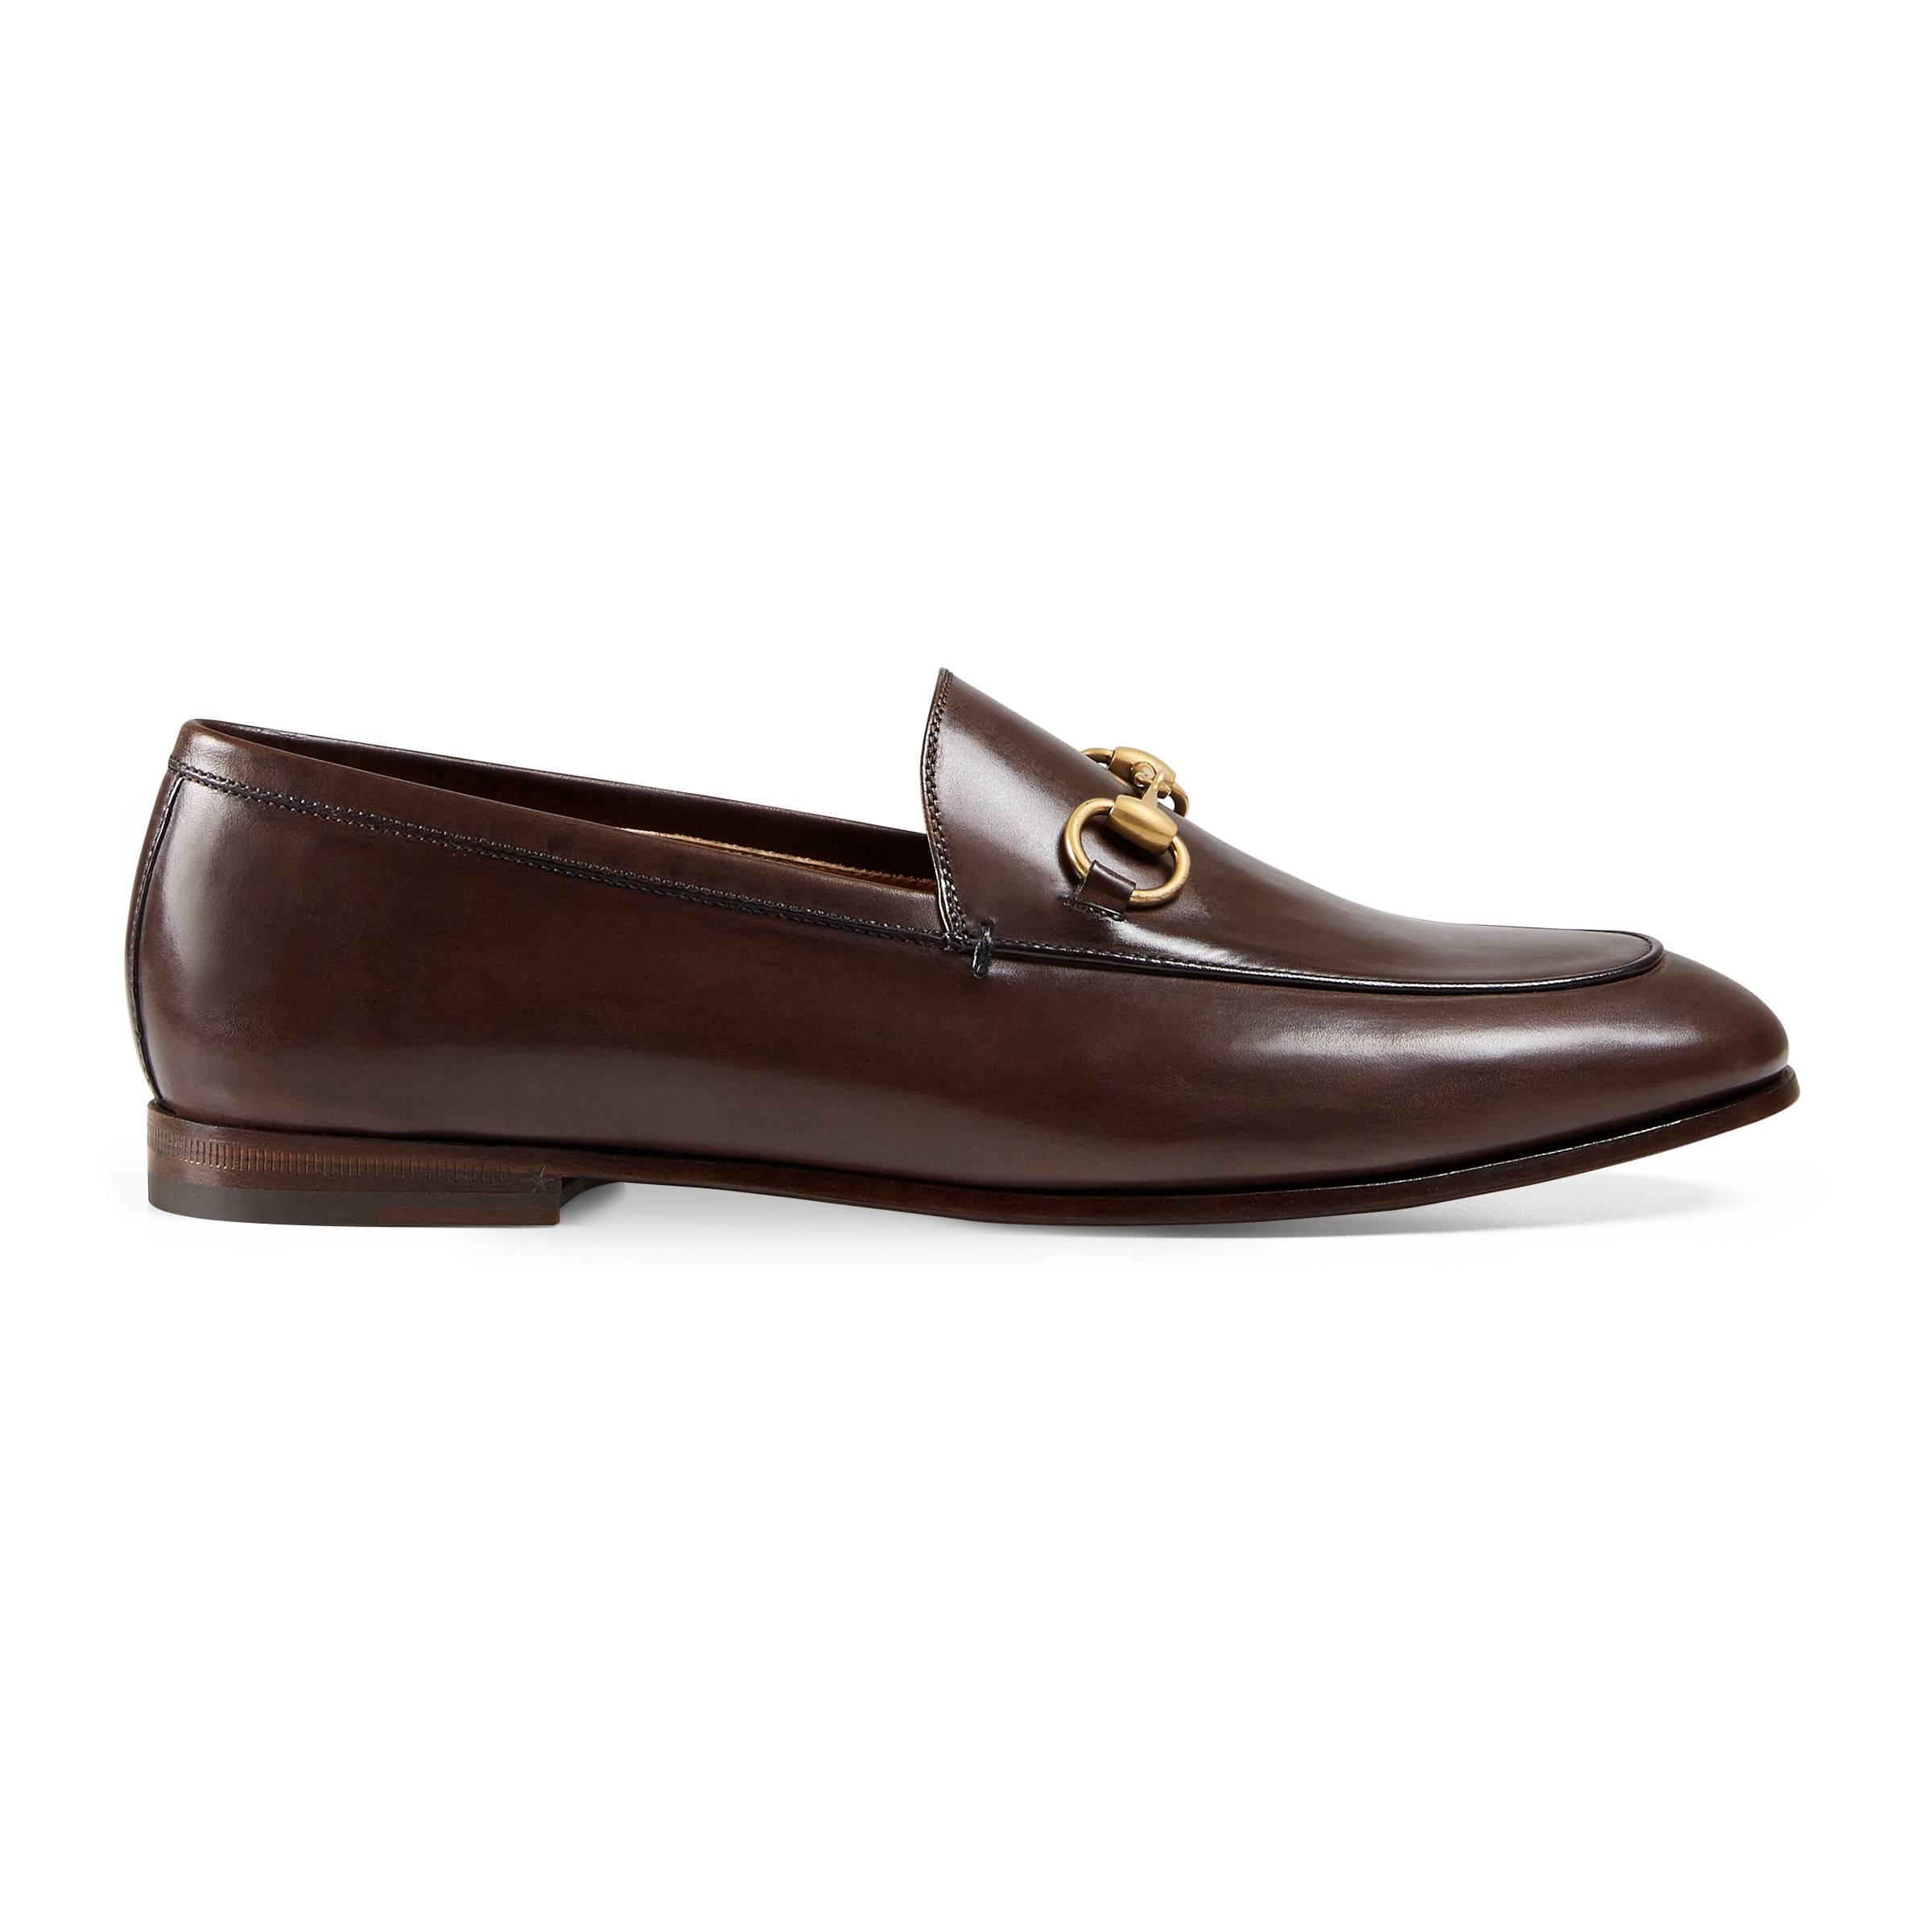 Gucci Jordaan Leather Loafer in Brown - Lyst